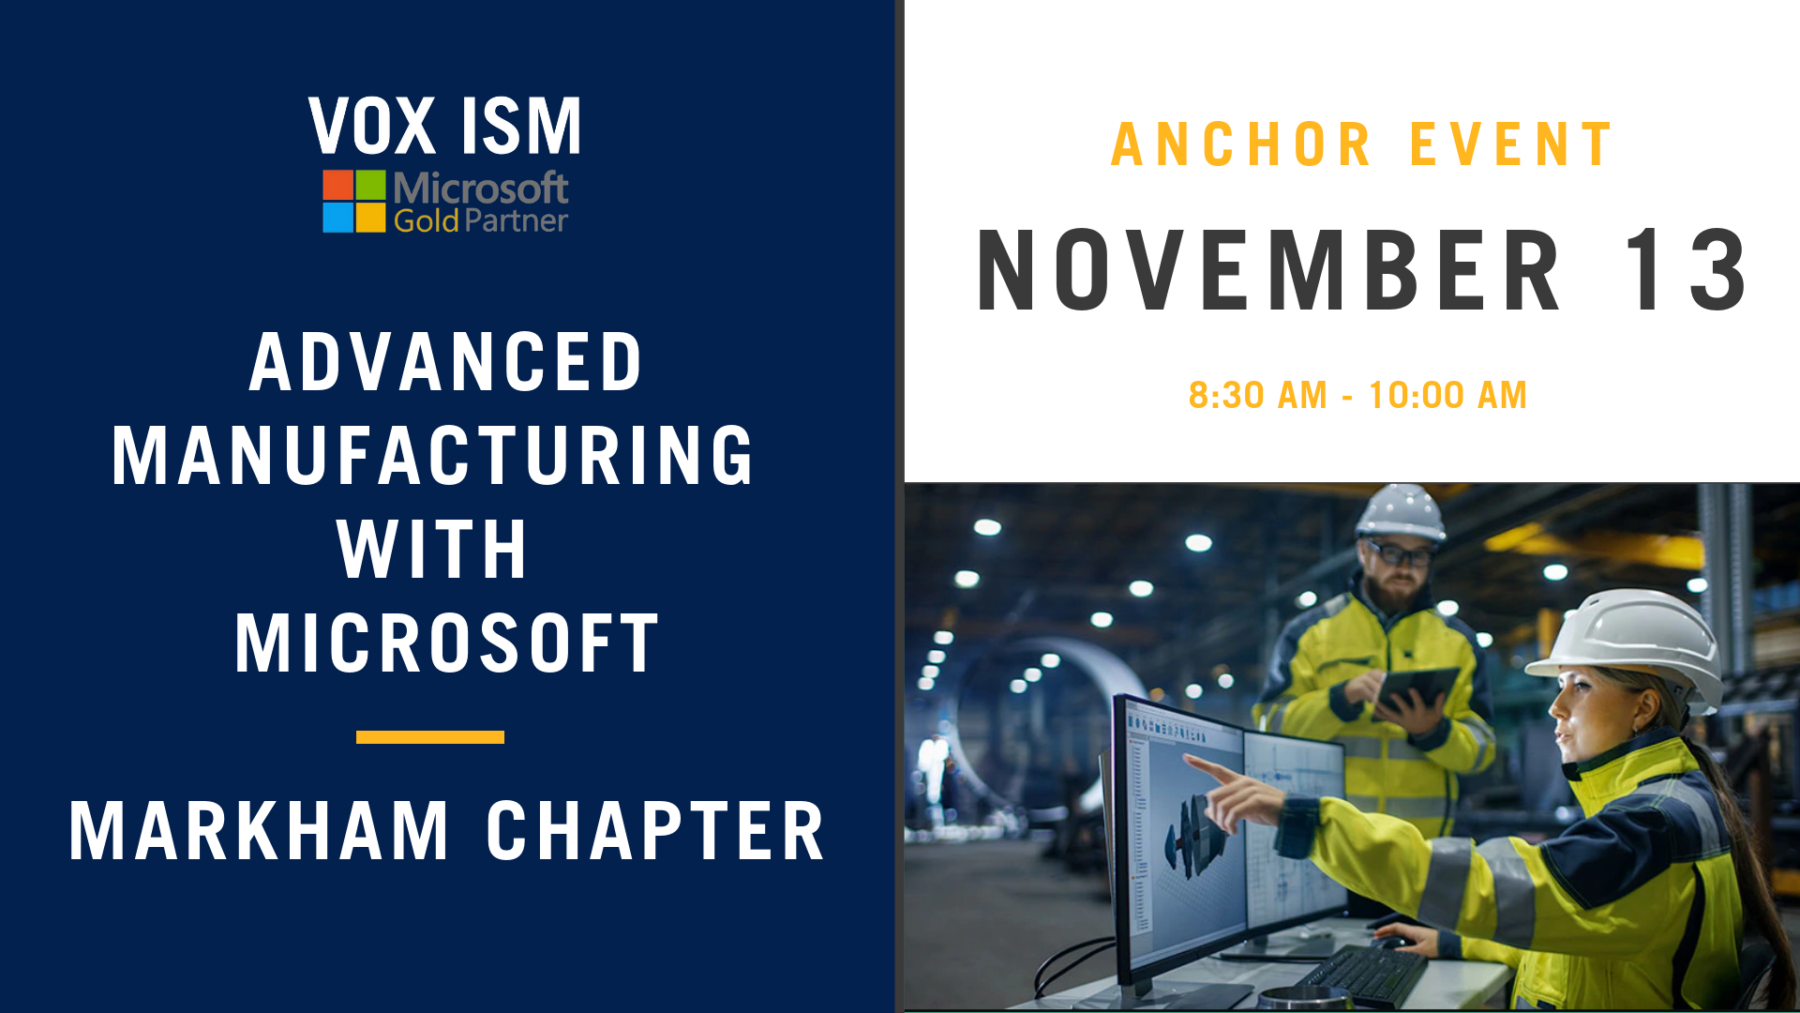 Advanced Manufacturing with Microsoft - Markham Chapter - November 13